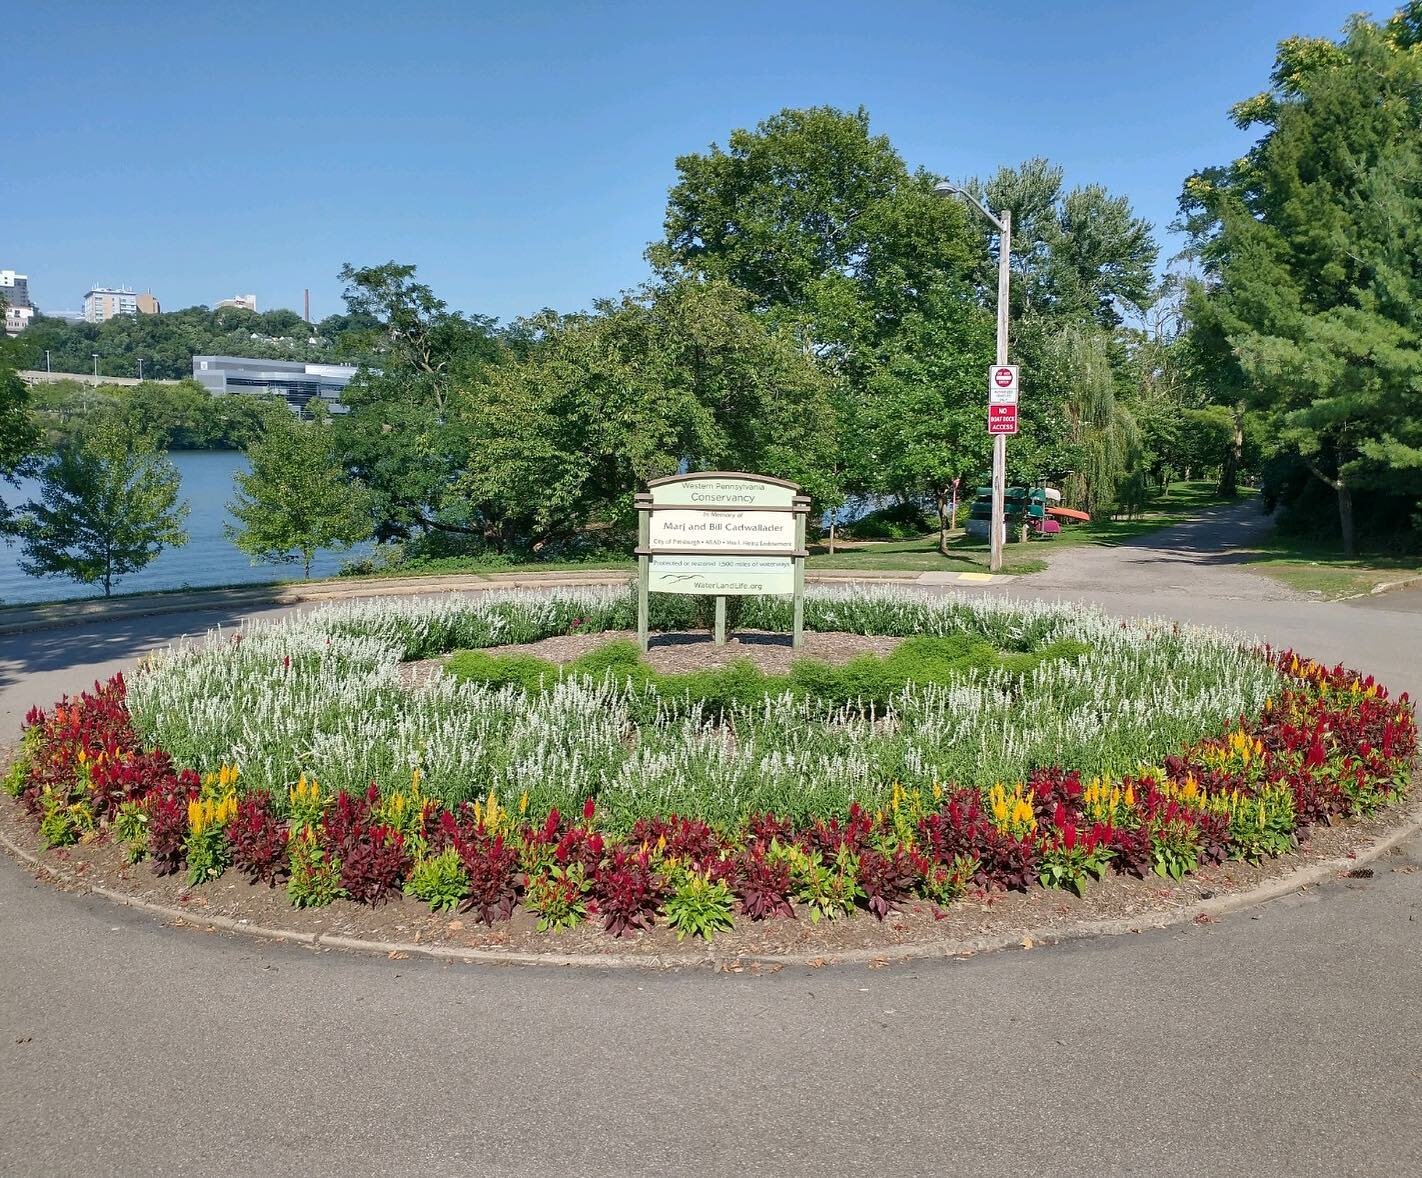 The beautiful flower garden Rhea planted in May is in full bloom🌼

If you&rsquo;re ever along the Riverfront Trail in Pittsburgh&rsquo;s South Side check it out!